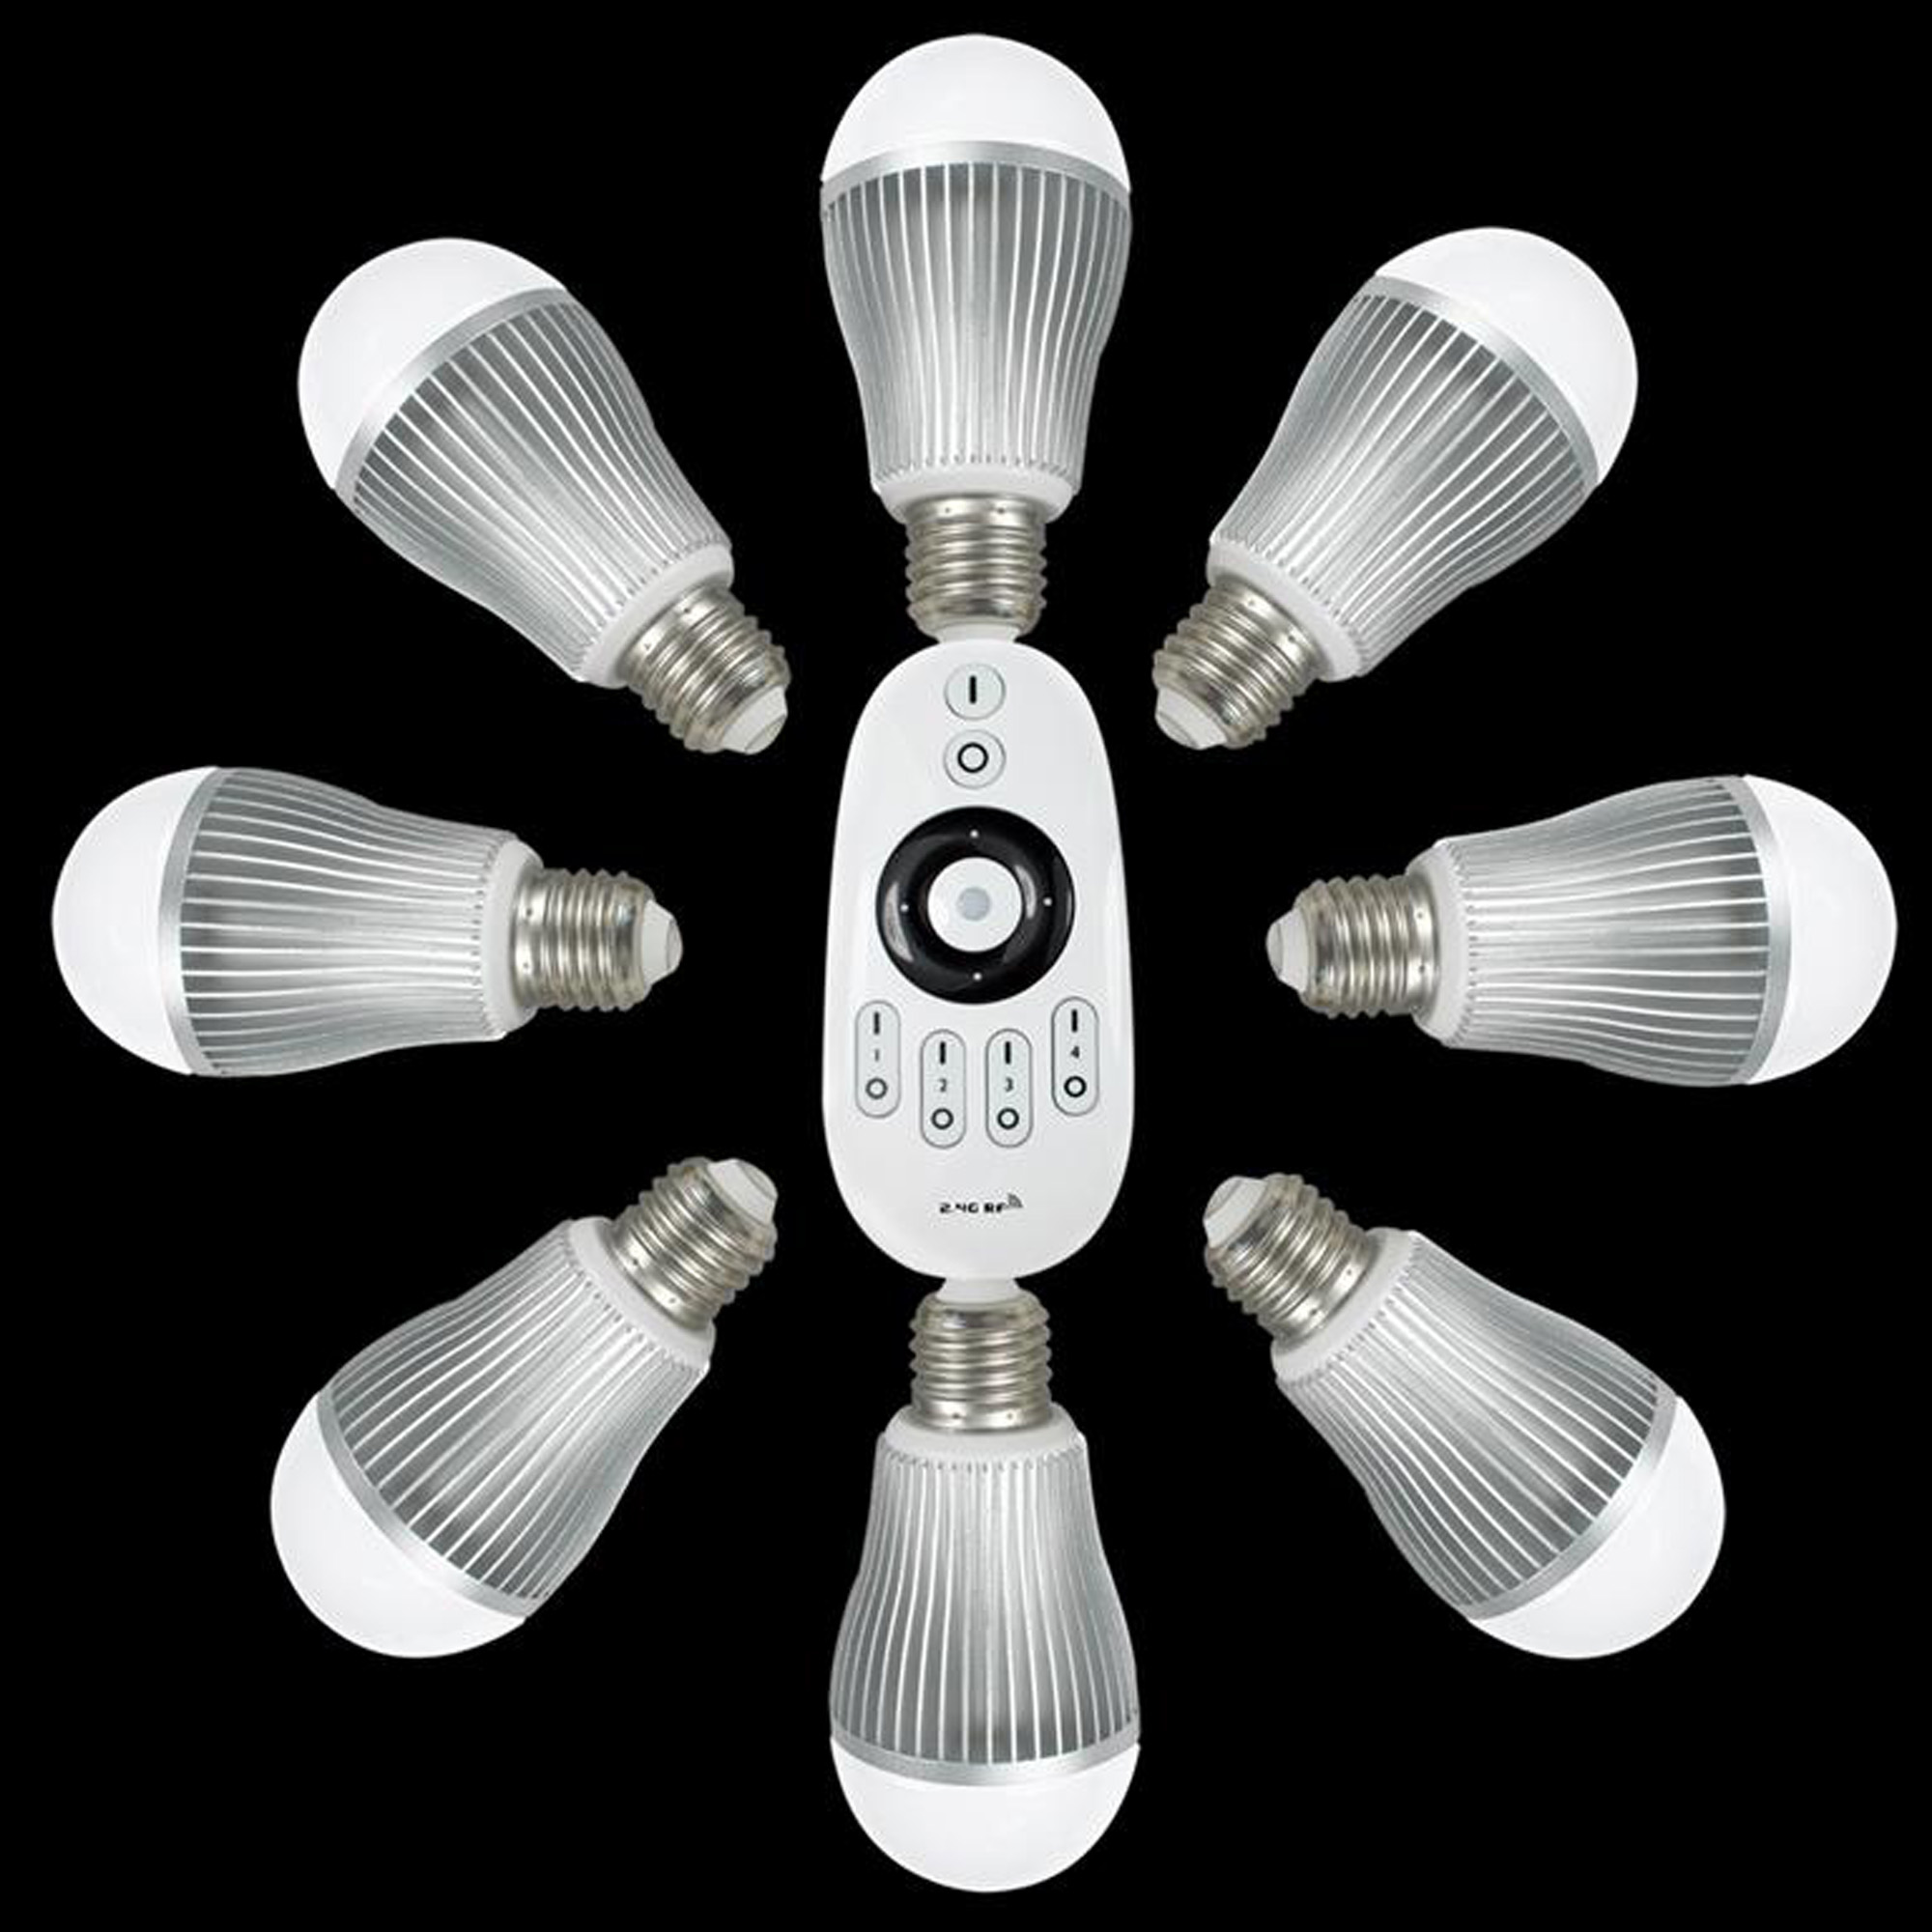 EnvironmentalLights.com Introduces Wifi-Enabled LED Light Bulbs and